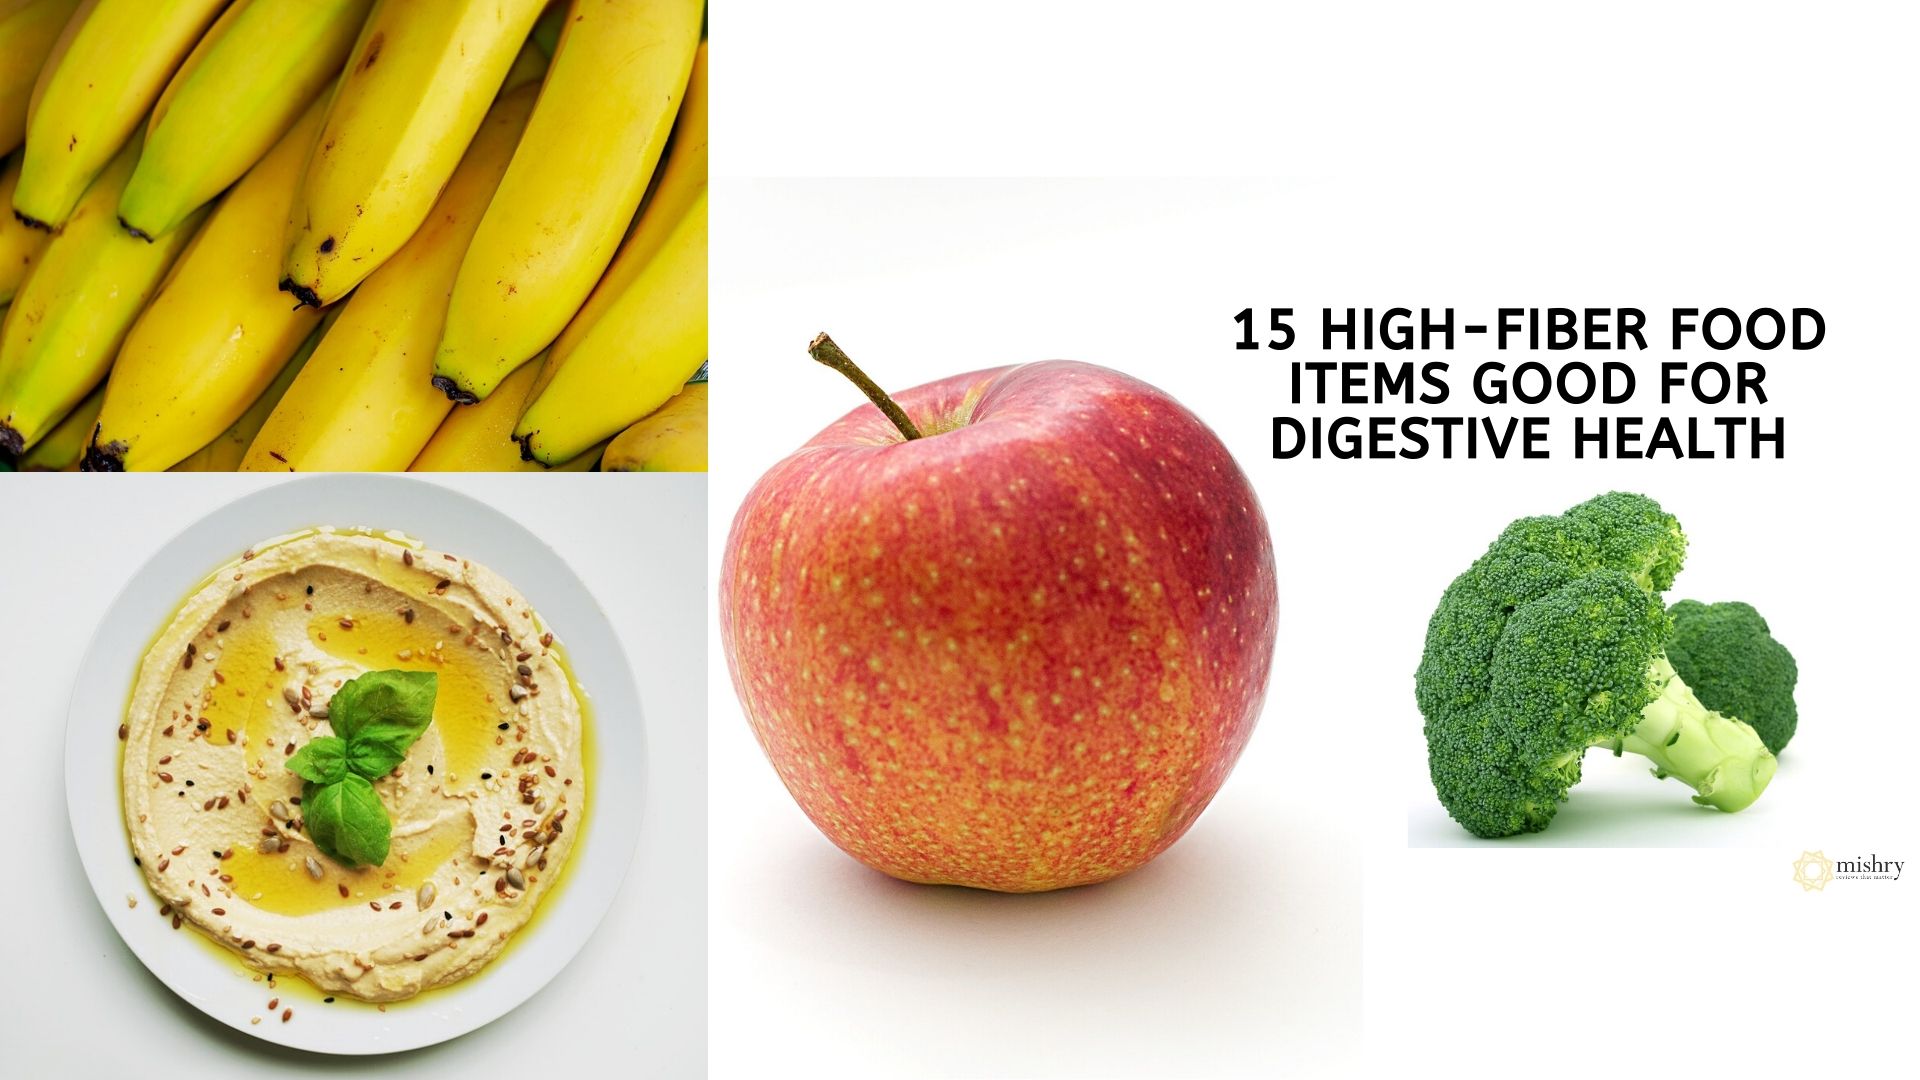 15 high-fiber food items that are good for your digestive health